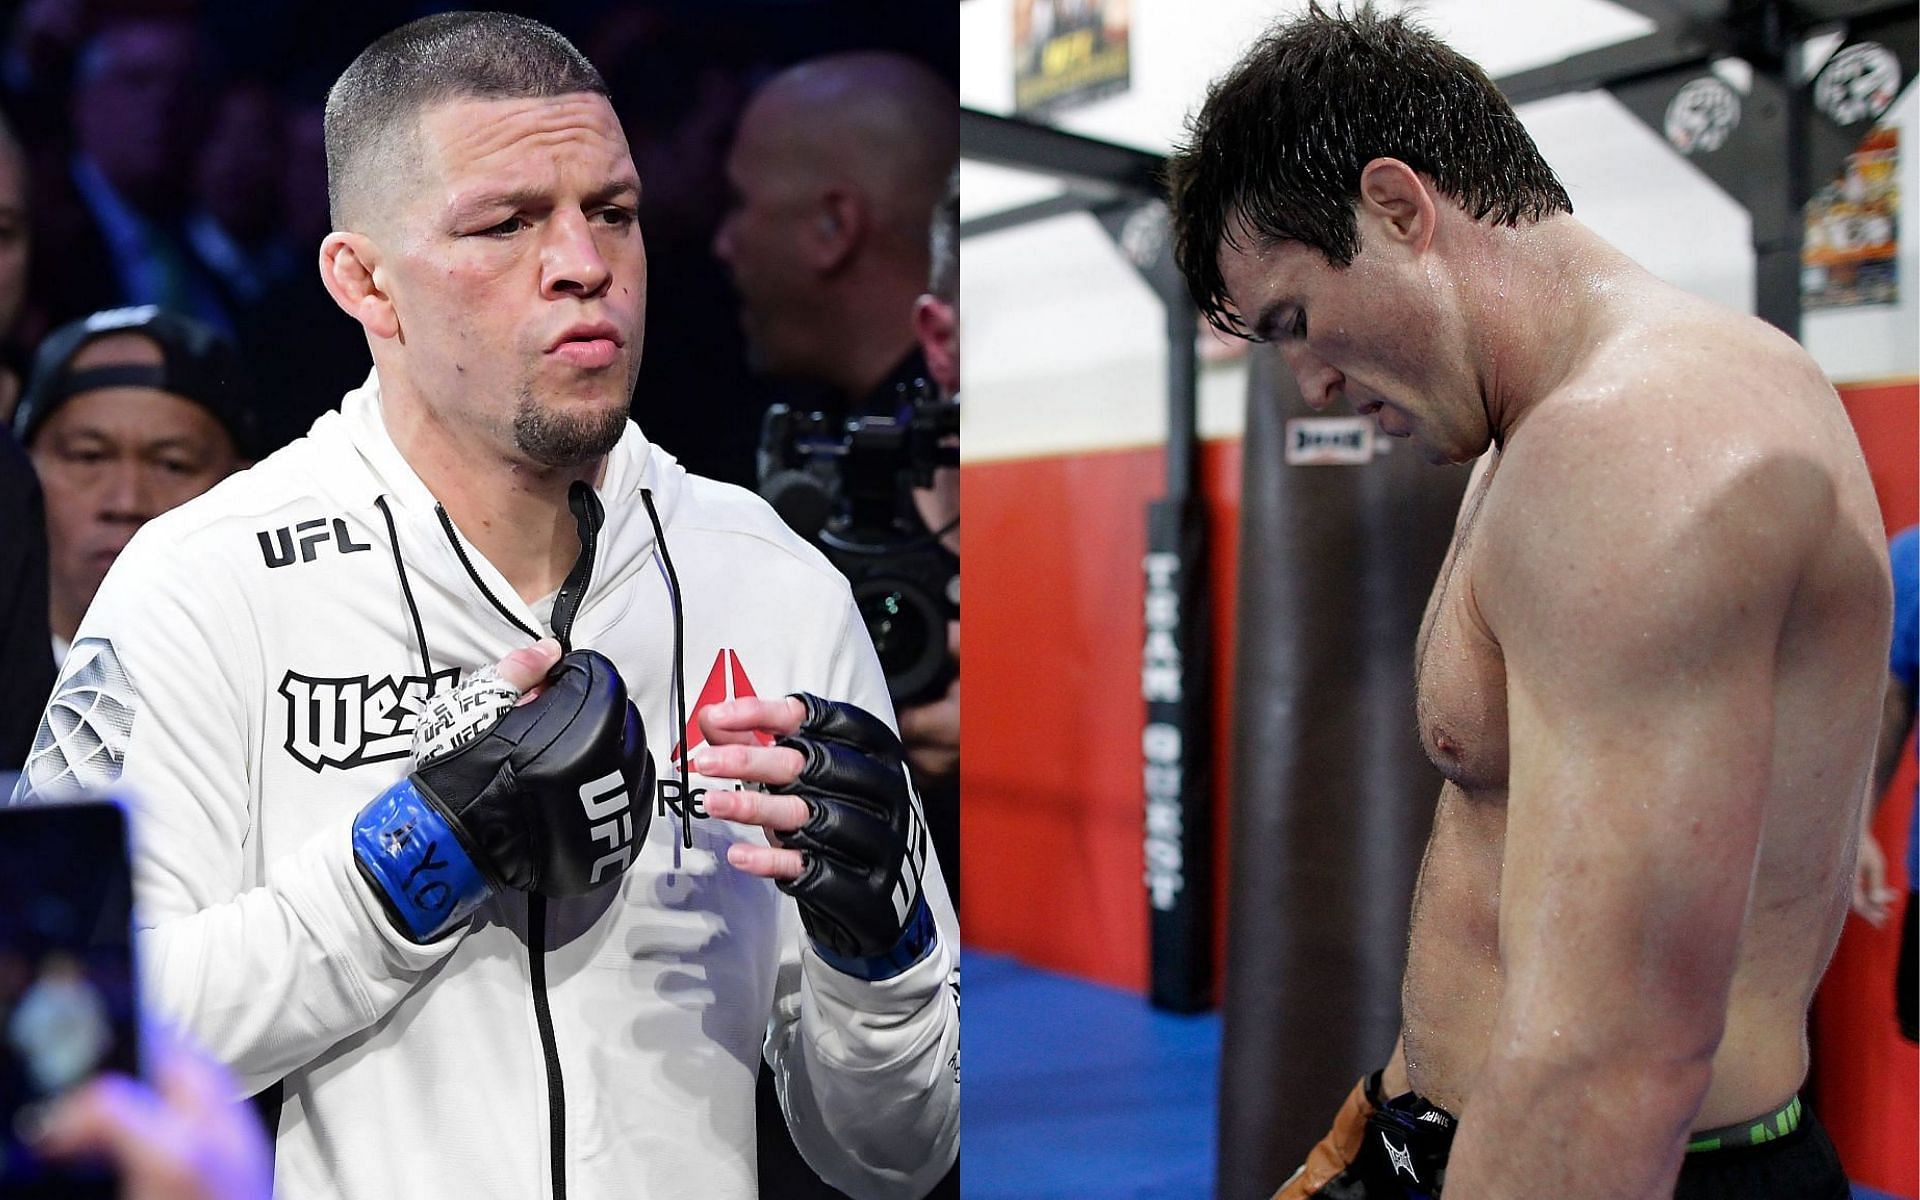 Nate Diaz (left) and Chael Sonnen (right)